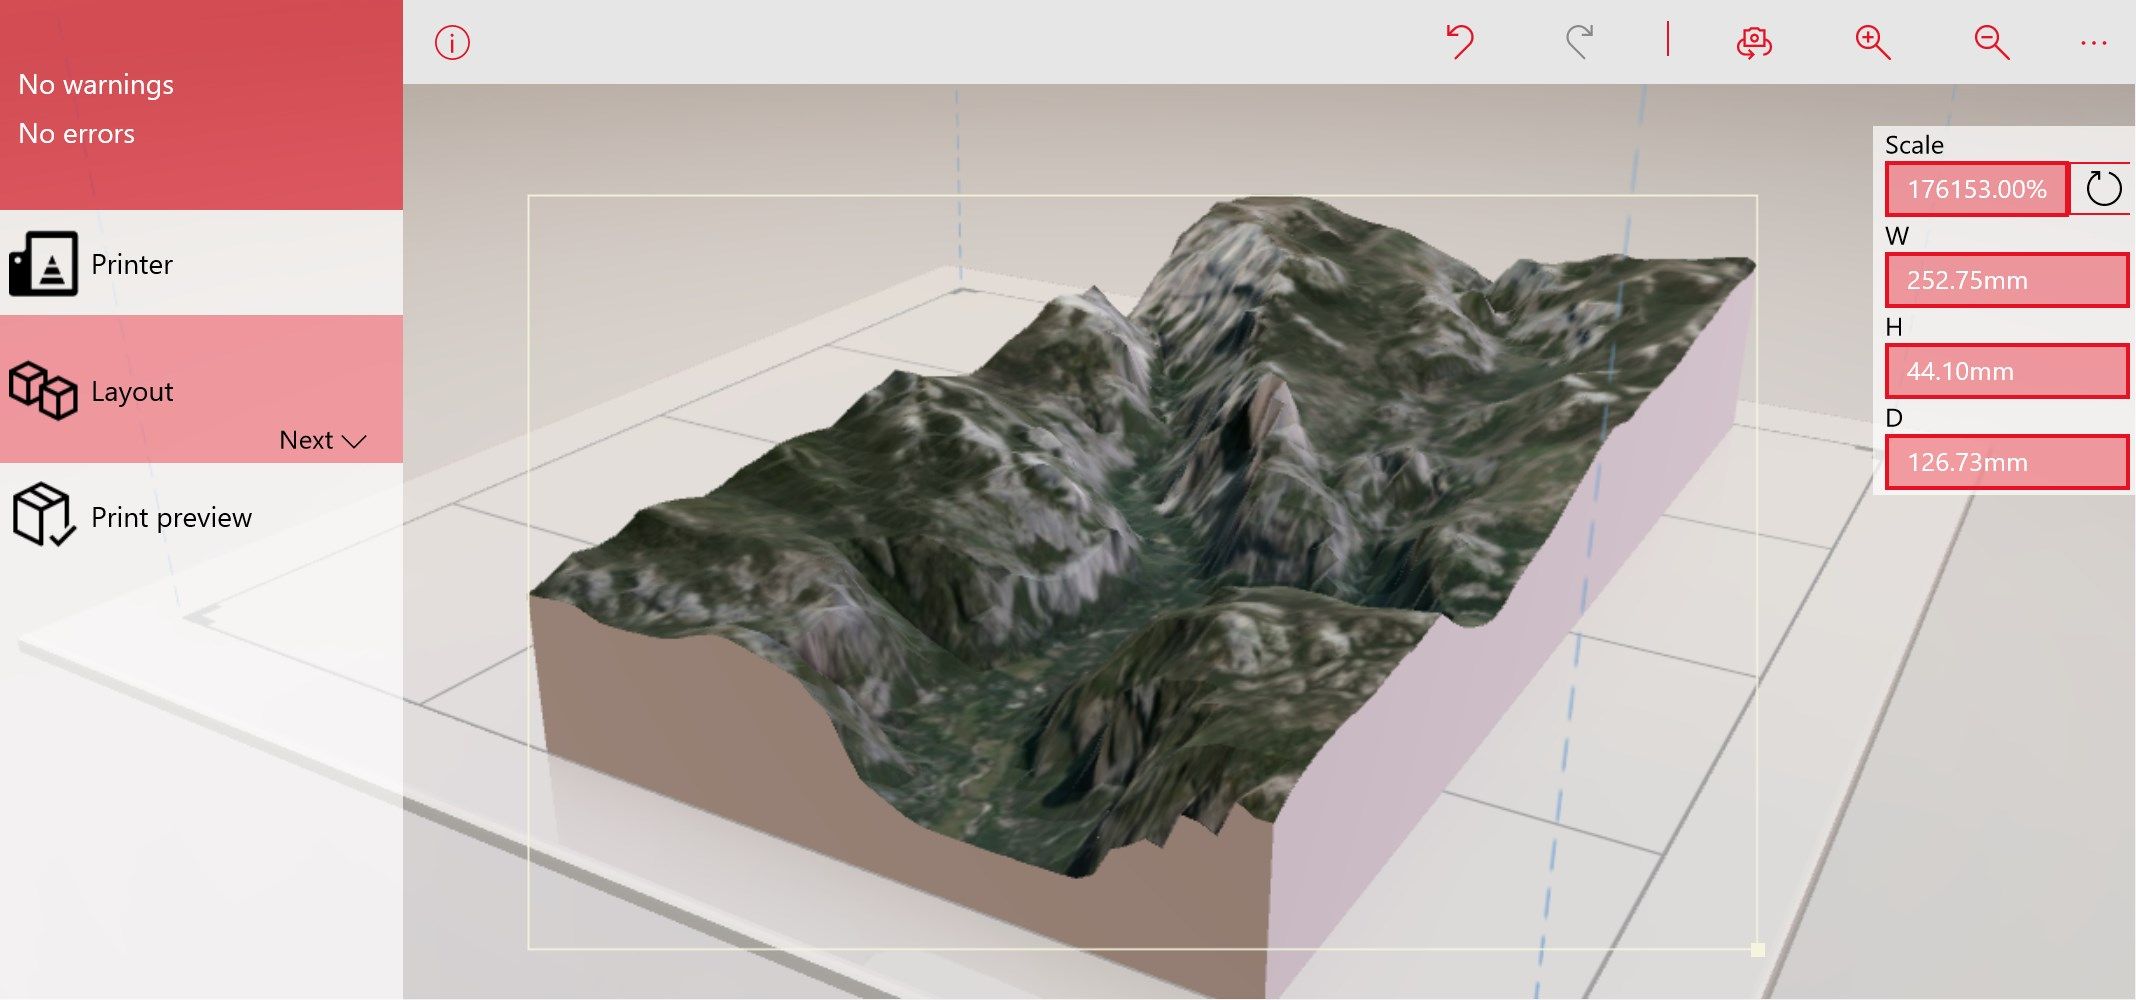 Try different image types: road, aerial, terrain, or aerial 3D.